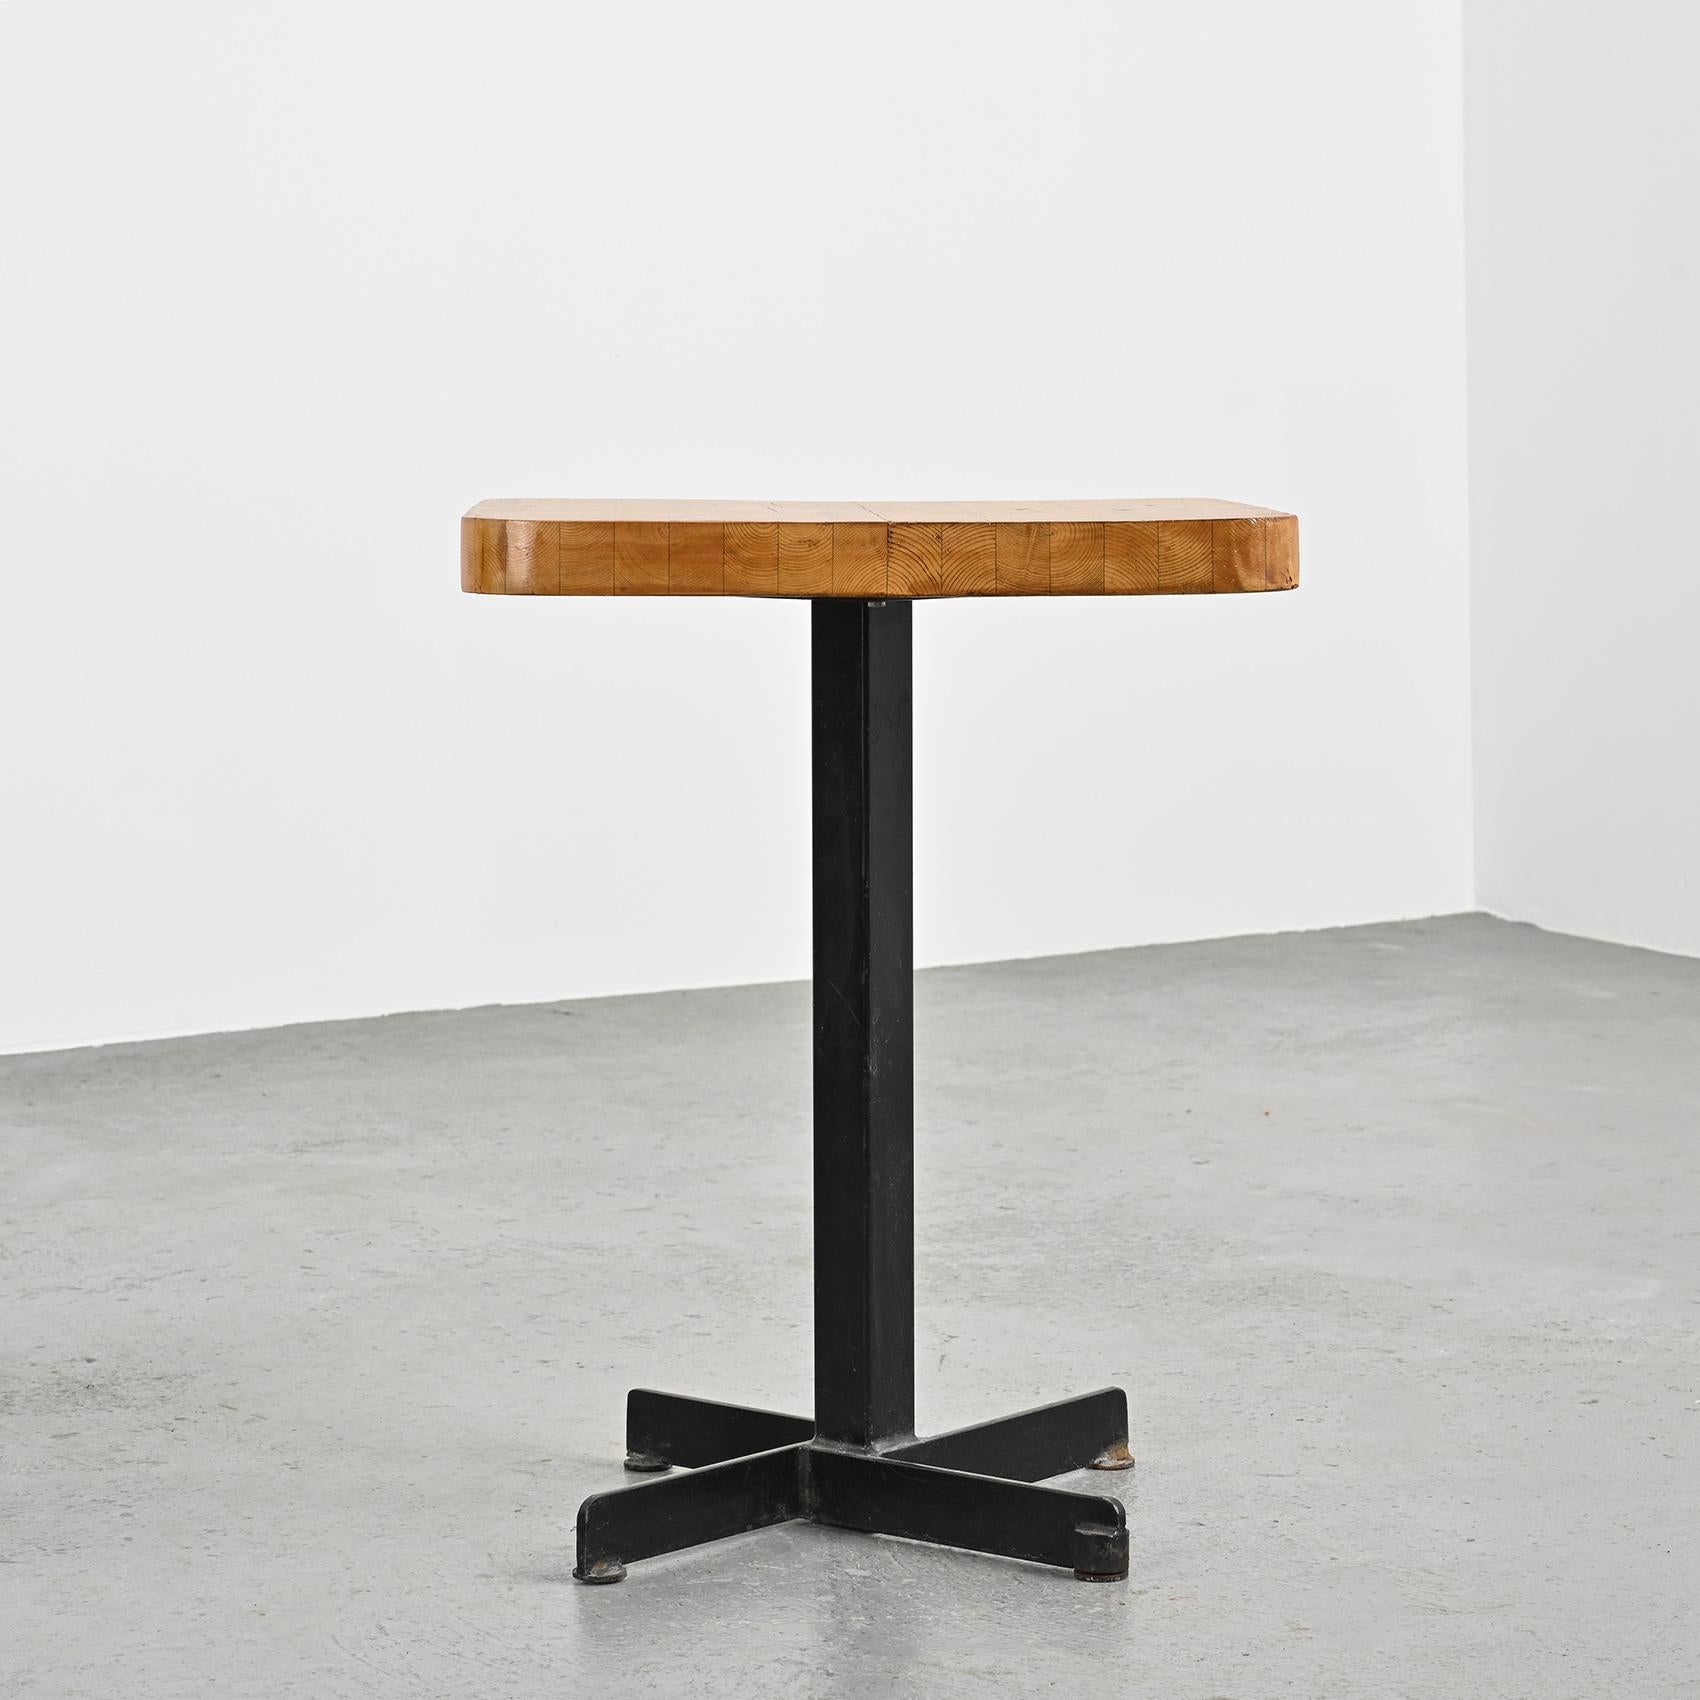 This iconic table from Charlotte Perriand has a very nice patina.

Designed in the 70s for the furnishment of the Nova and the Lauzières residences in Les Arcs 1800 in the French Alps, it is made out of a laminated pine squaretop and a cruciform